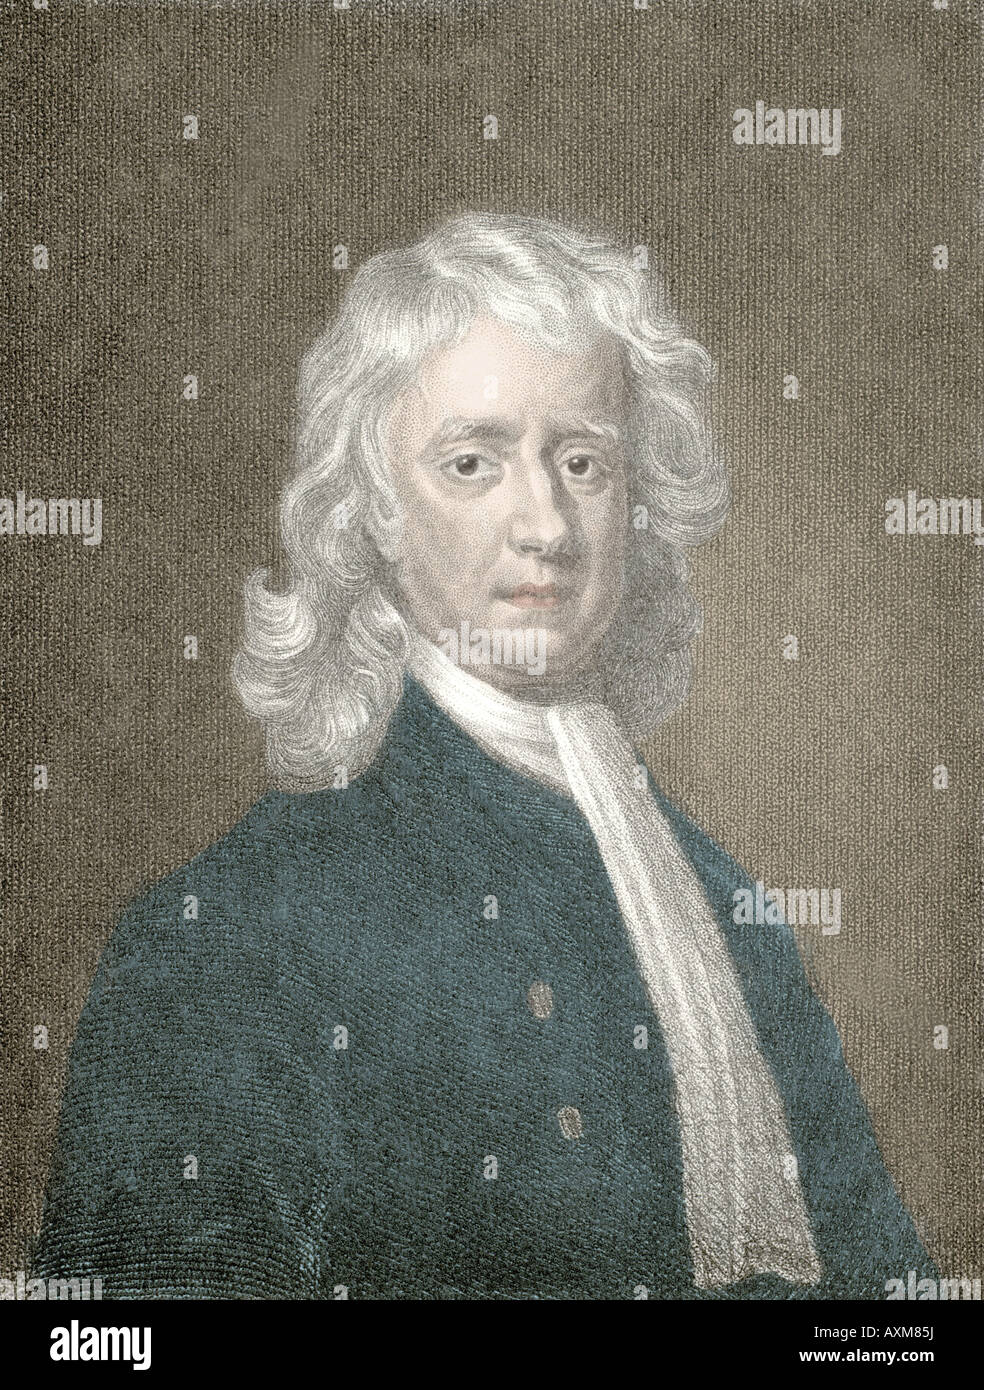 Sir Isaac Newton (1642 - 1727) English mathematician, philosopher and scientist. Stock Photo